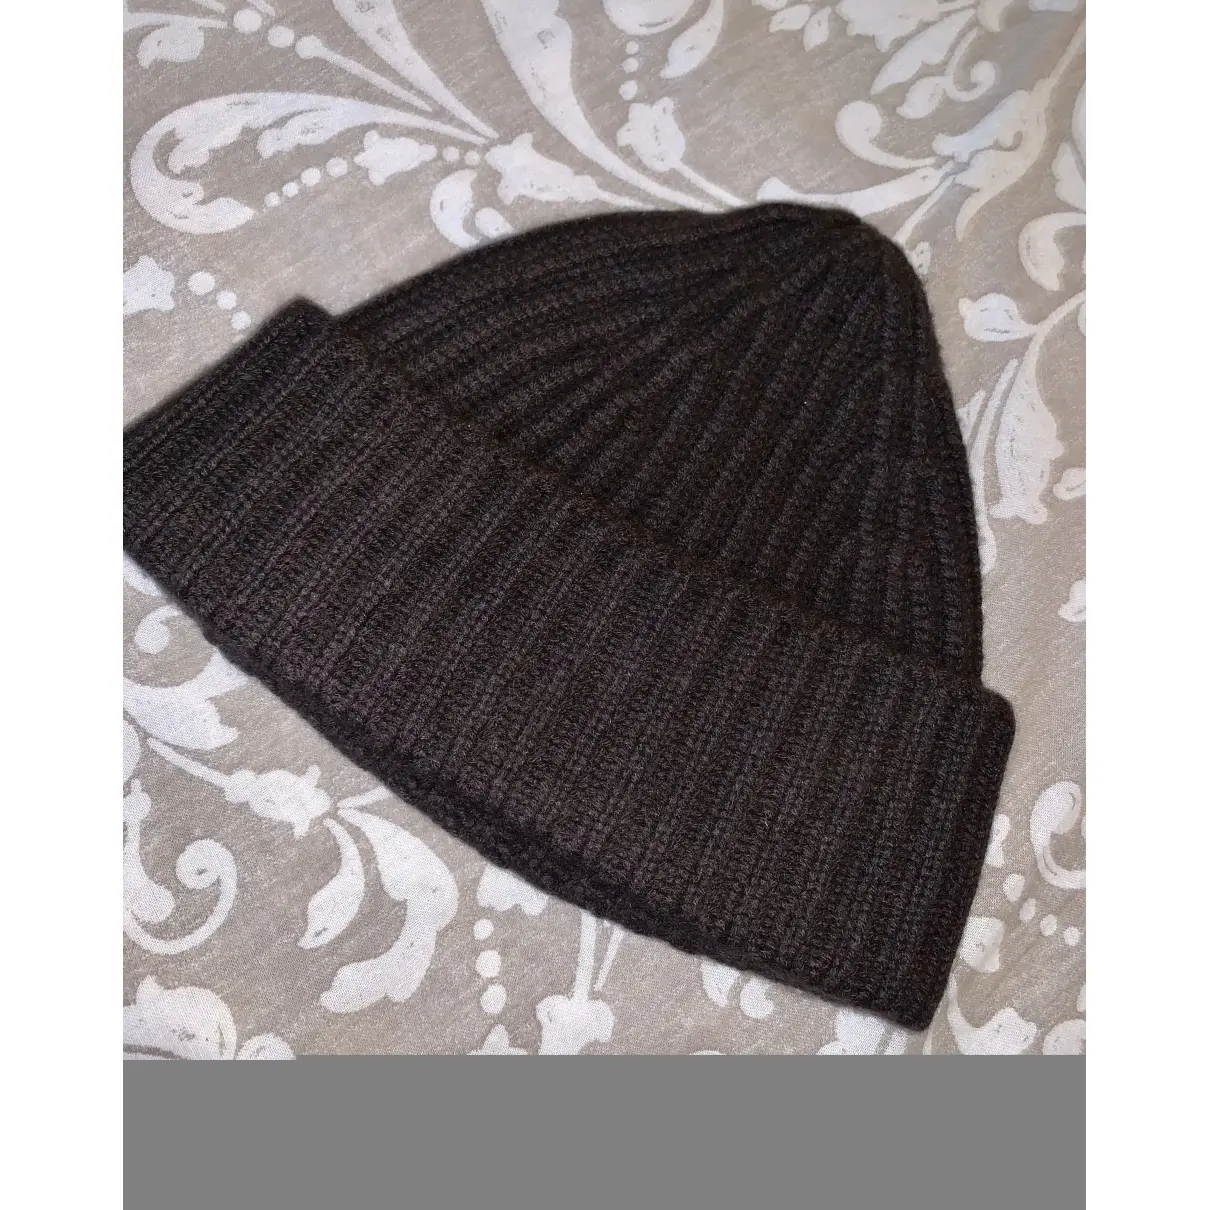 Buy Malo Cashmere hat online